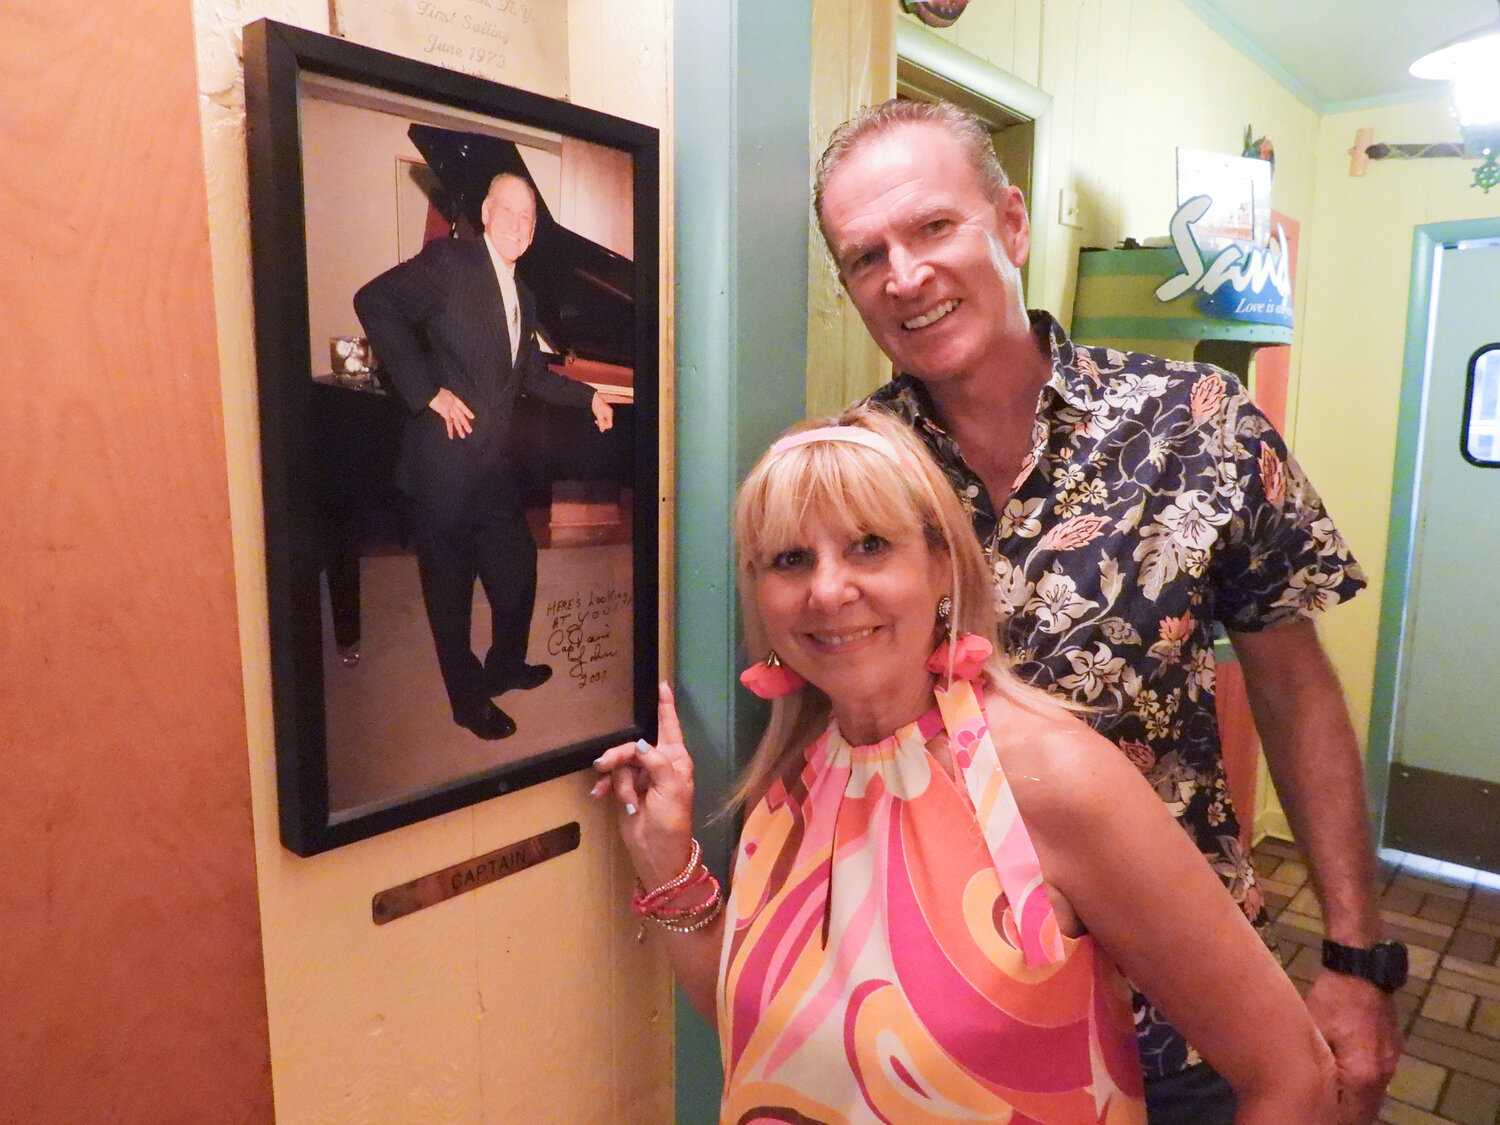 Elaine DePerno-Brown, daughter of the original Captain John, and her husband Andy Brown run a tight ship at Captain John’s. Pictured are the two standing by a picture of the original Captain John.